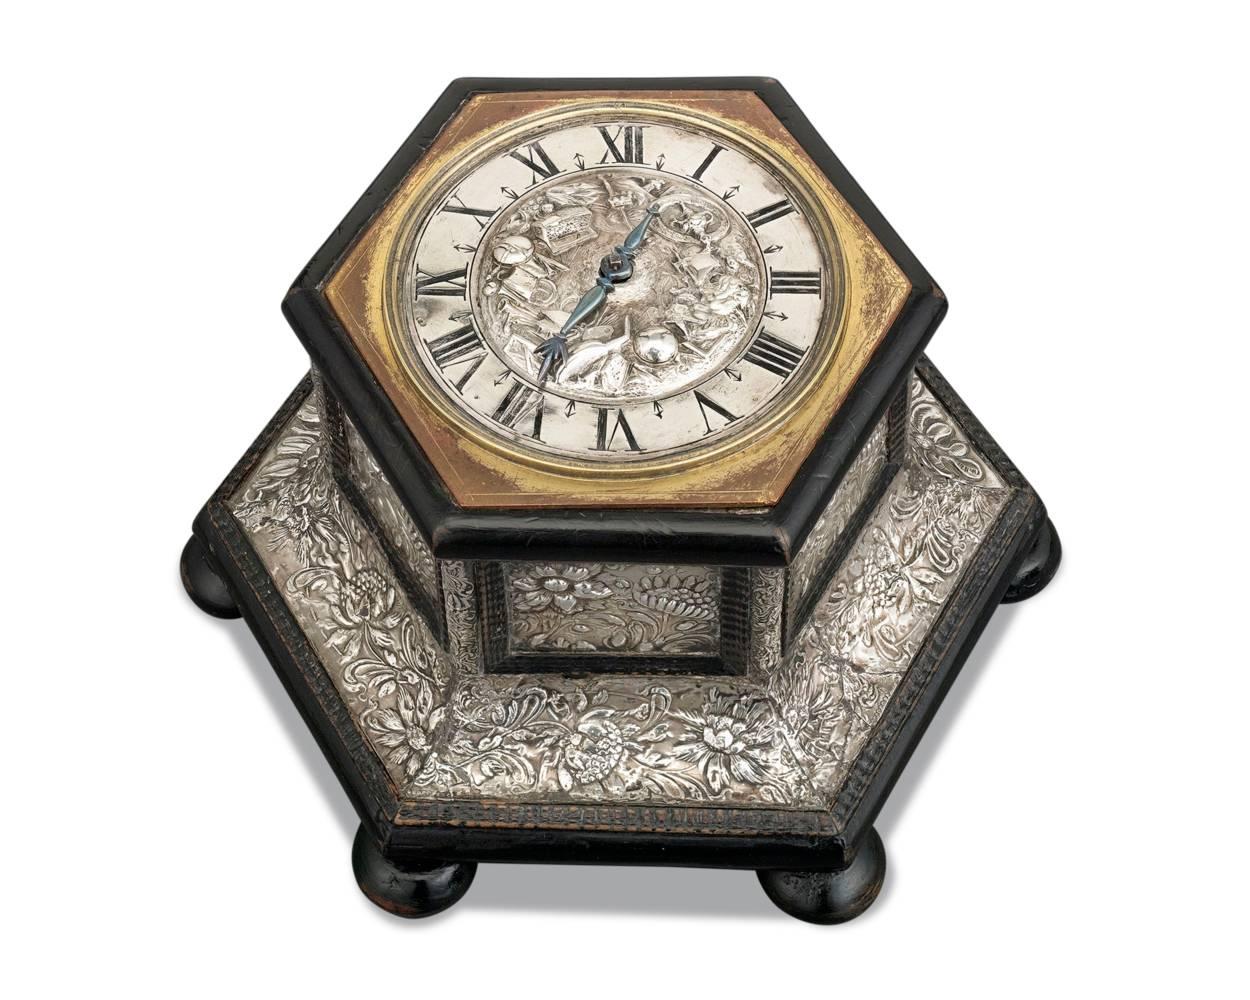 Exceptional beauty and innovation are on display in this rare German Renaissance table clock. Undeniably, some of the finest clocks of the 17th century were produced in the South German town of Augsburg. This clock, crafted by Augsburgian clockmaker